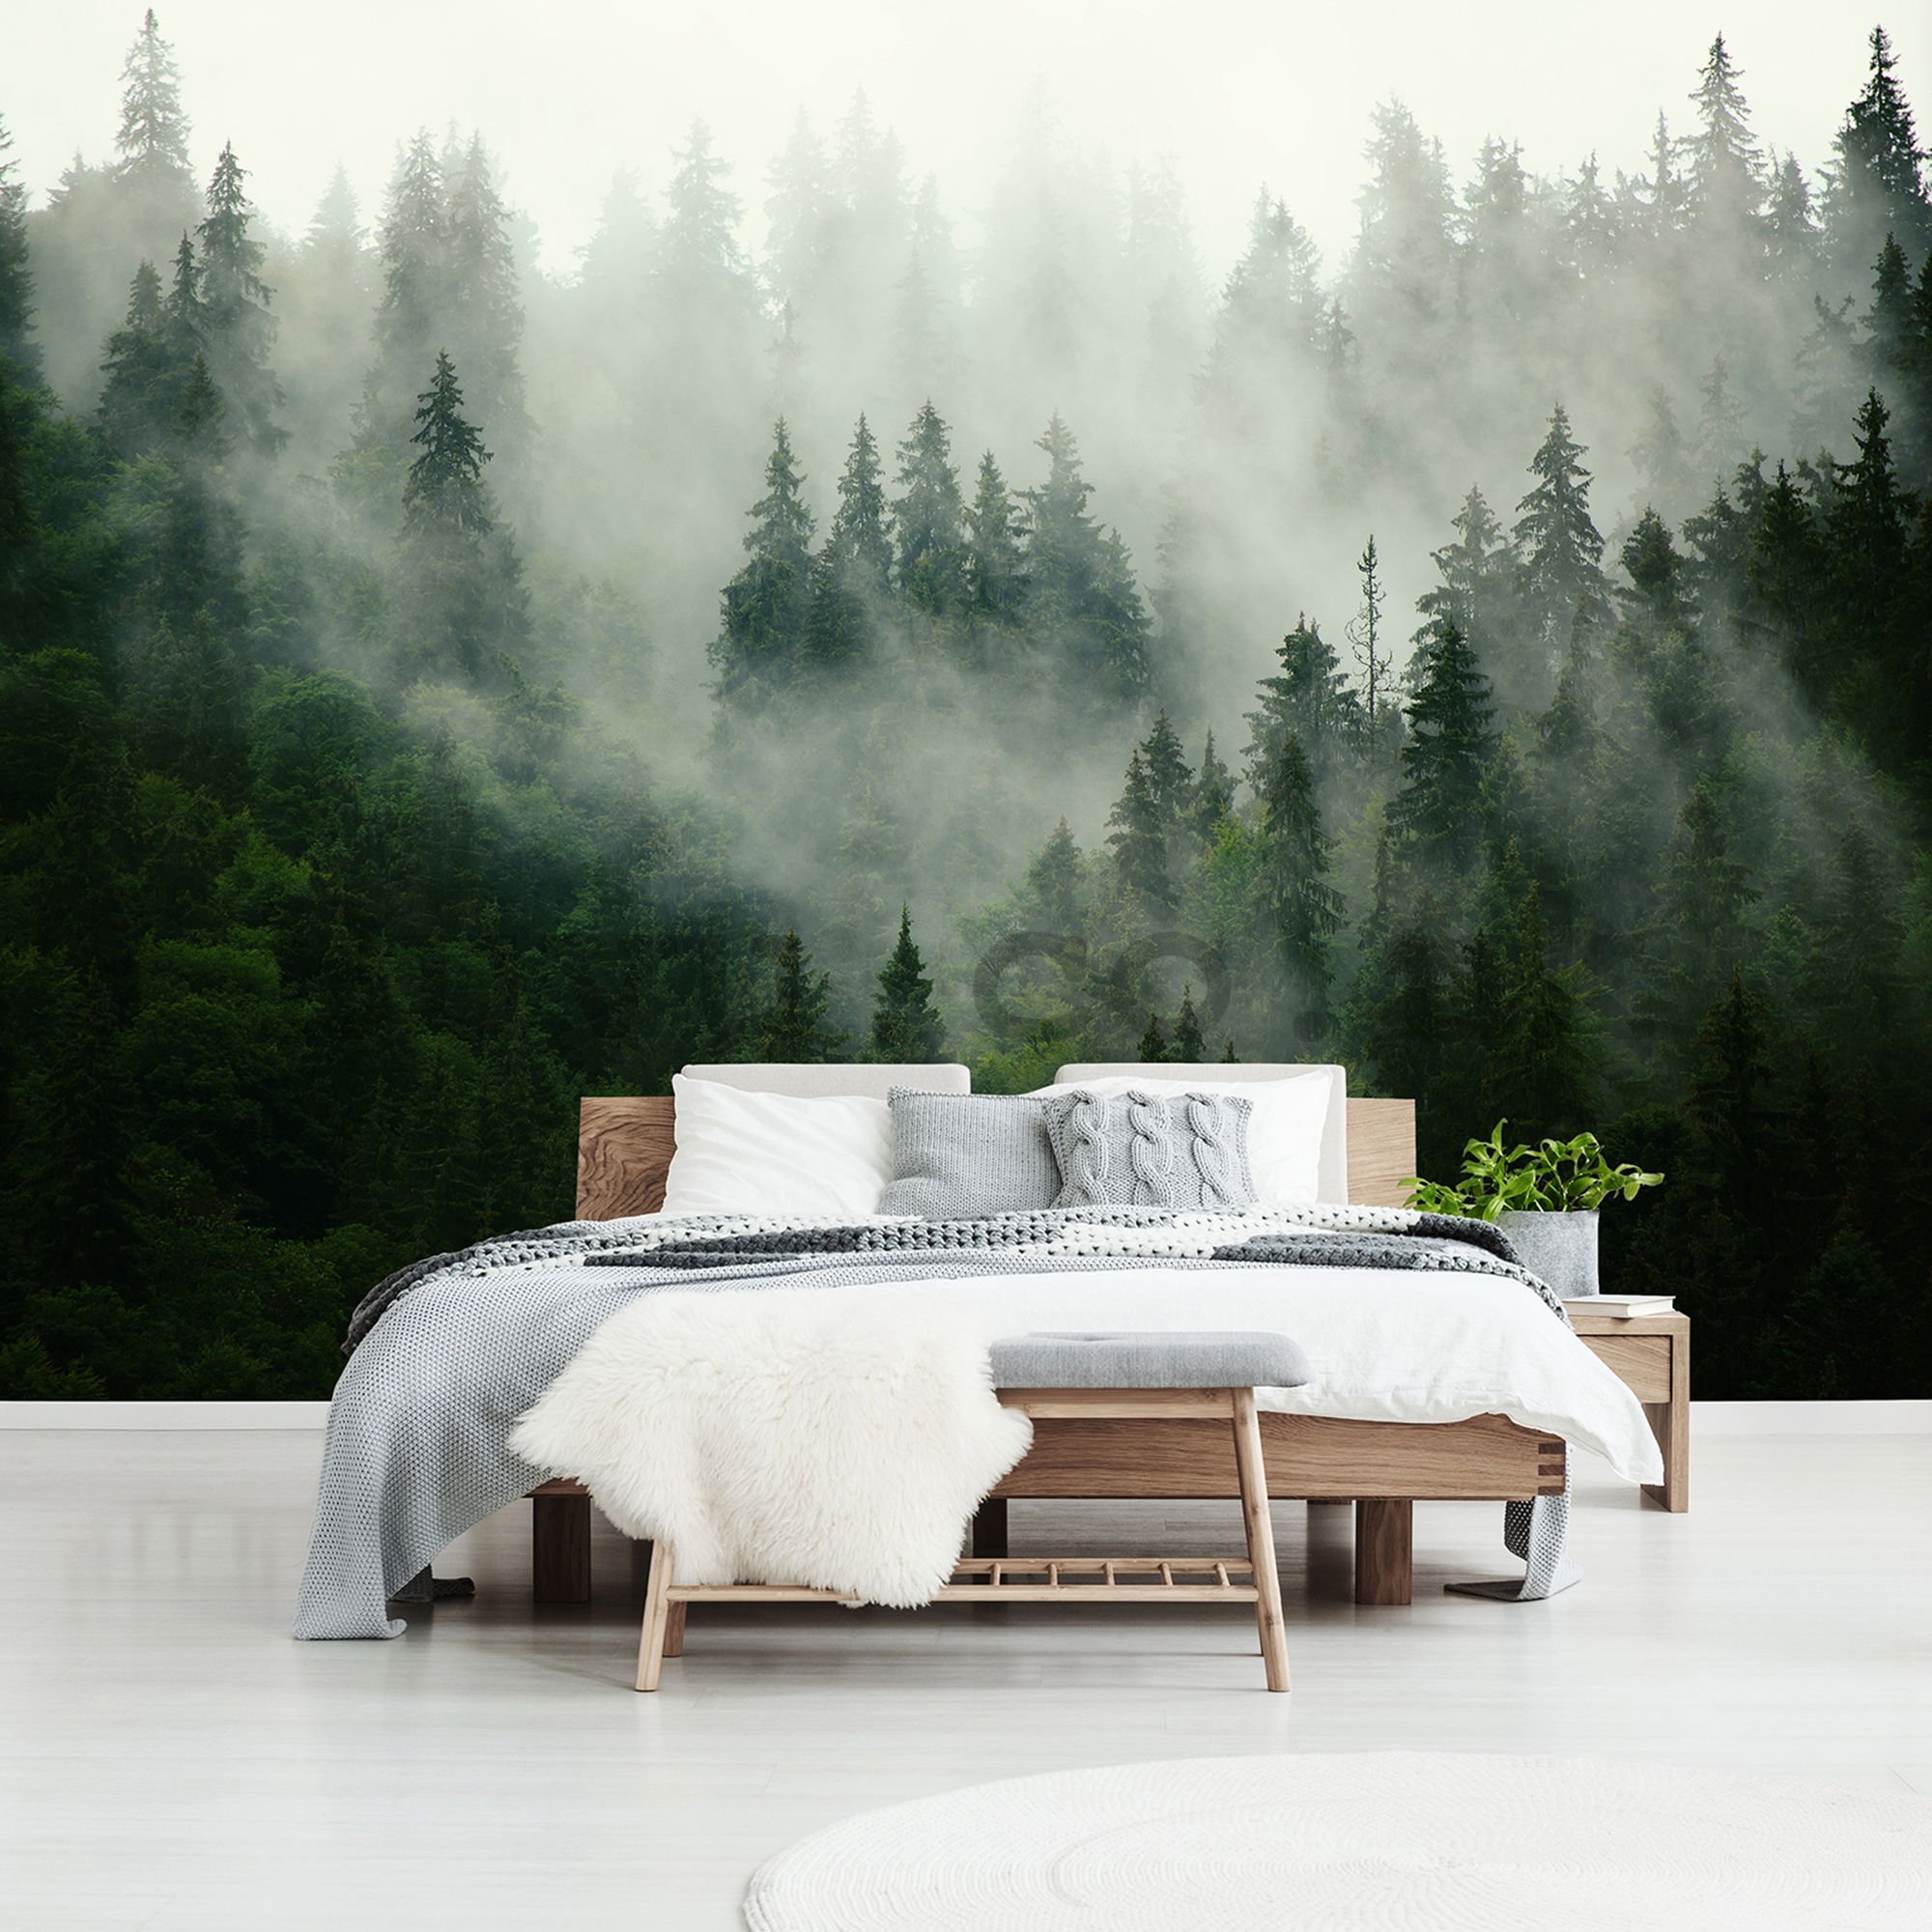 Wall mural vlies: Fog over the forest (1) - 104x152,5 cm